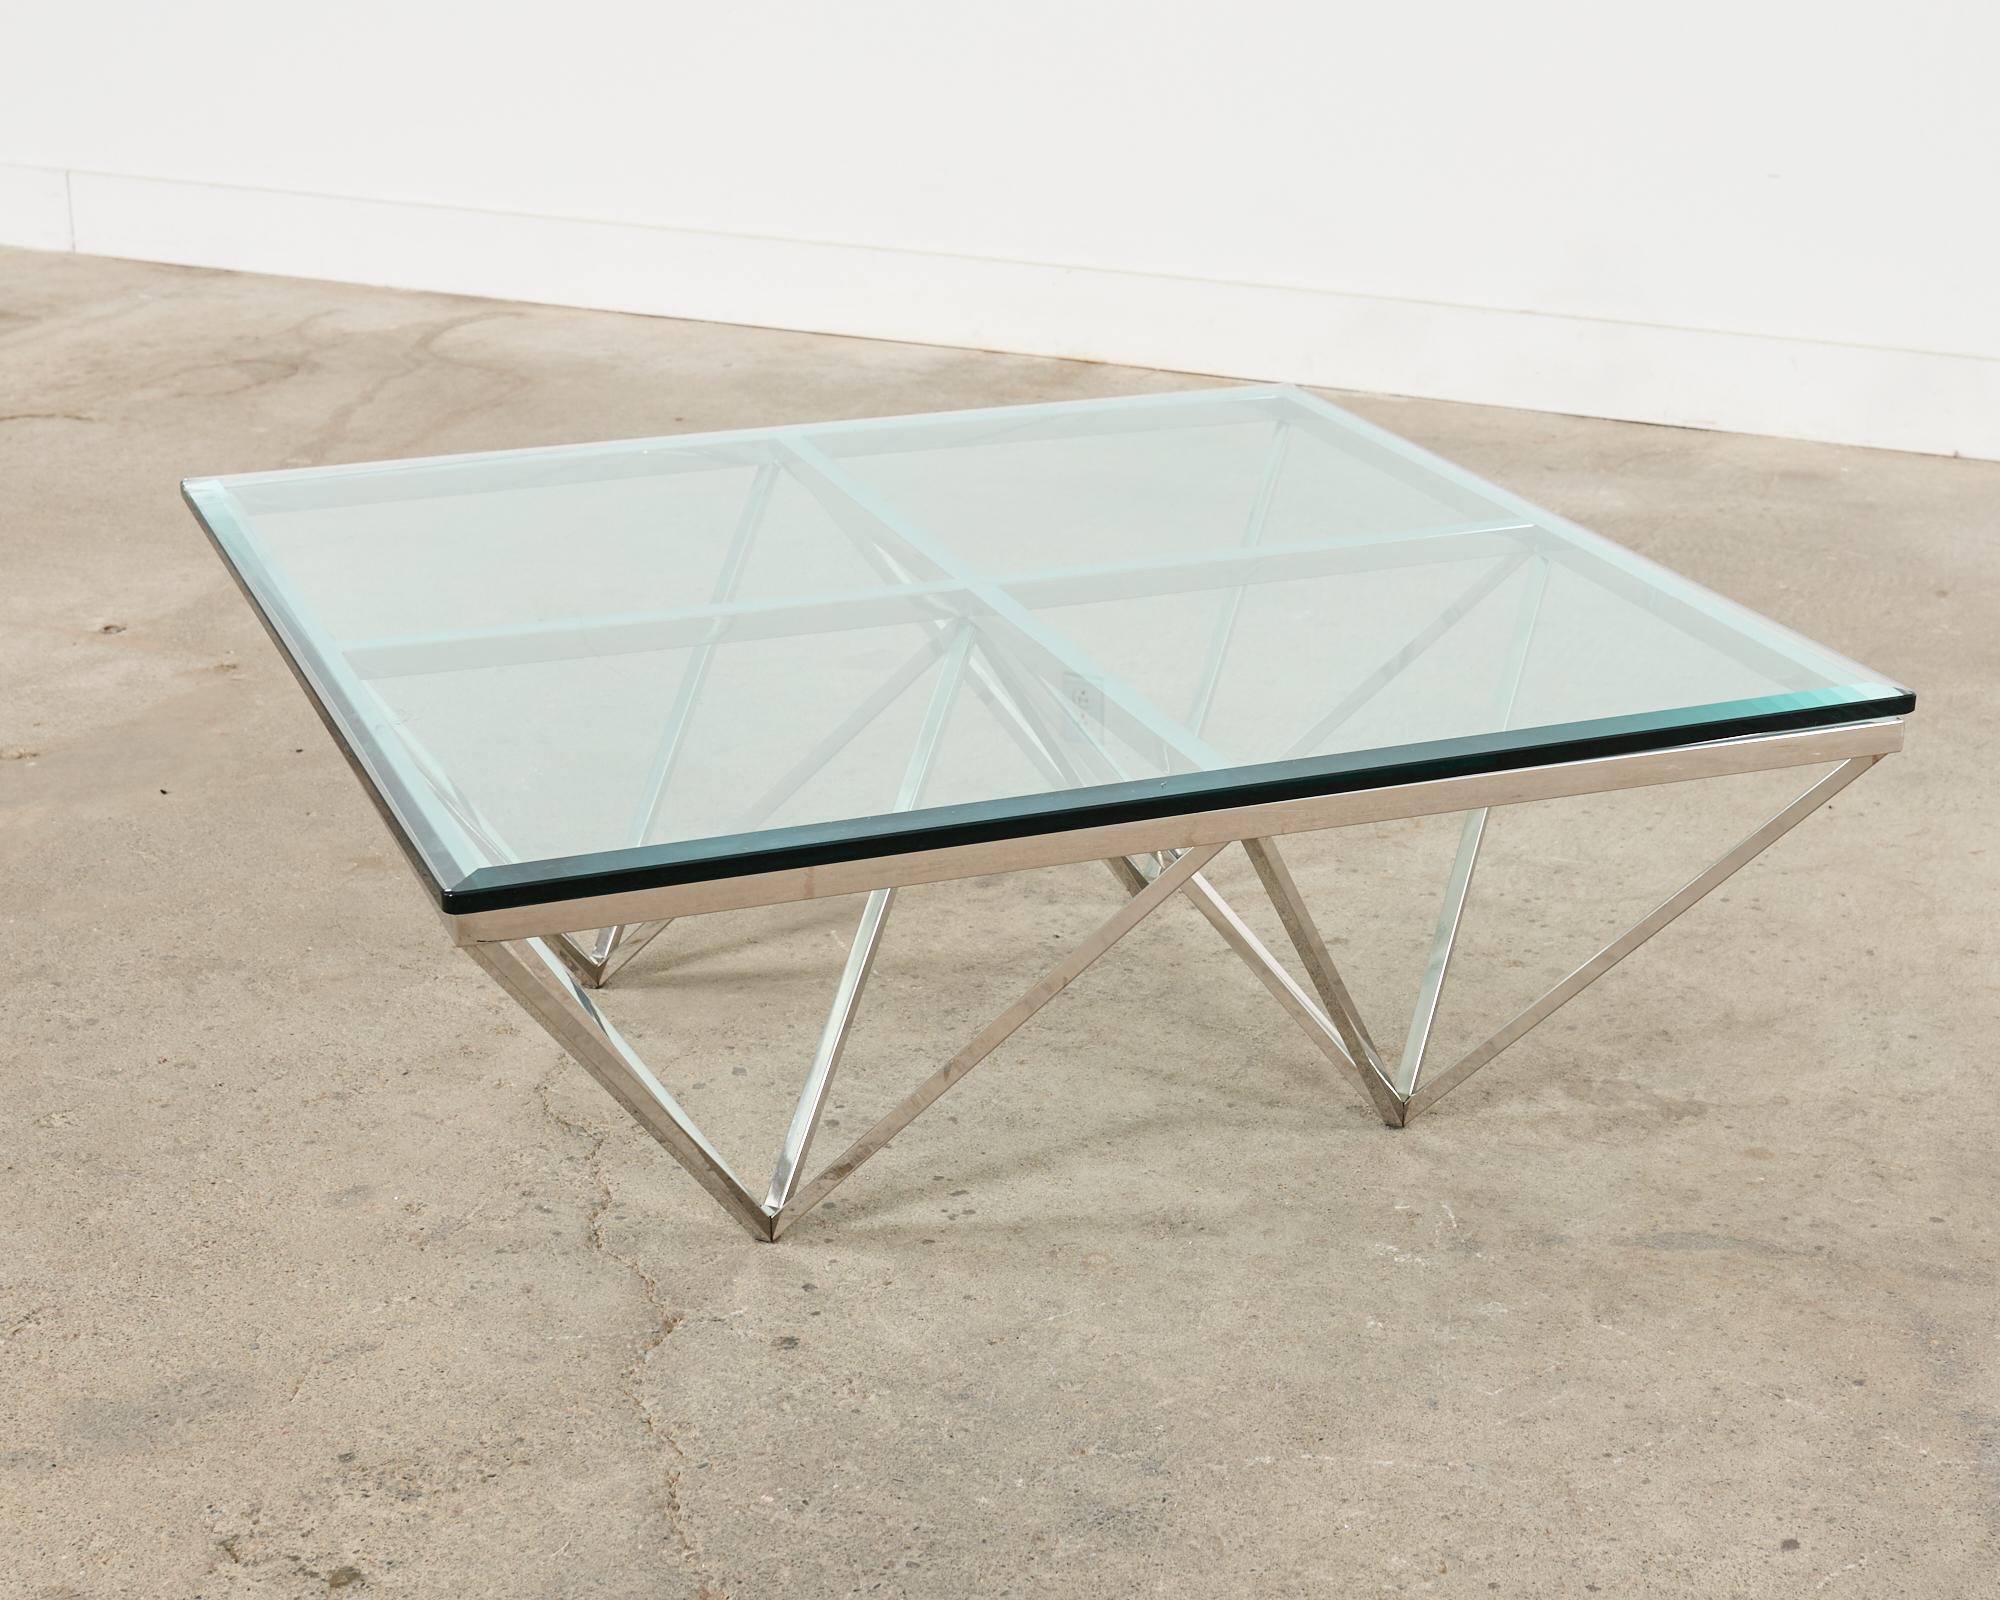 Beveled Paolo Piva Style Alanda Square Pyramidal Cocktail Table For Sale